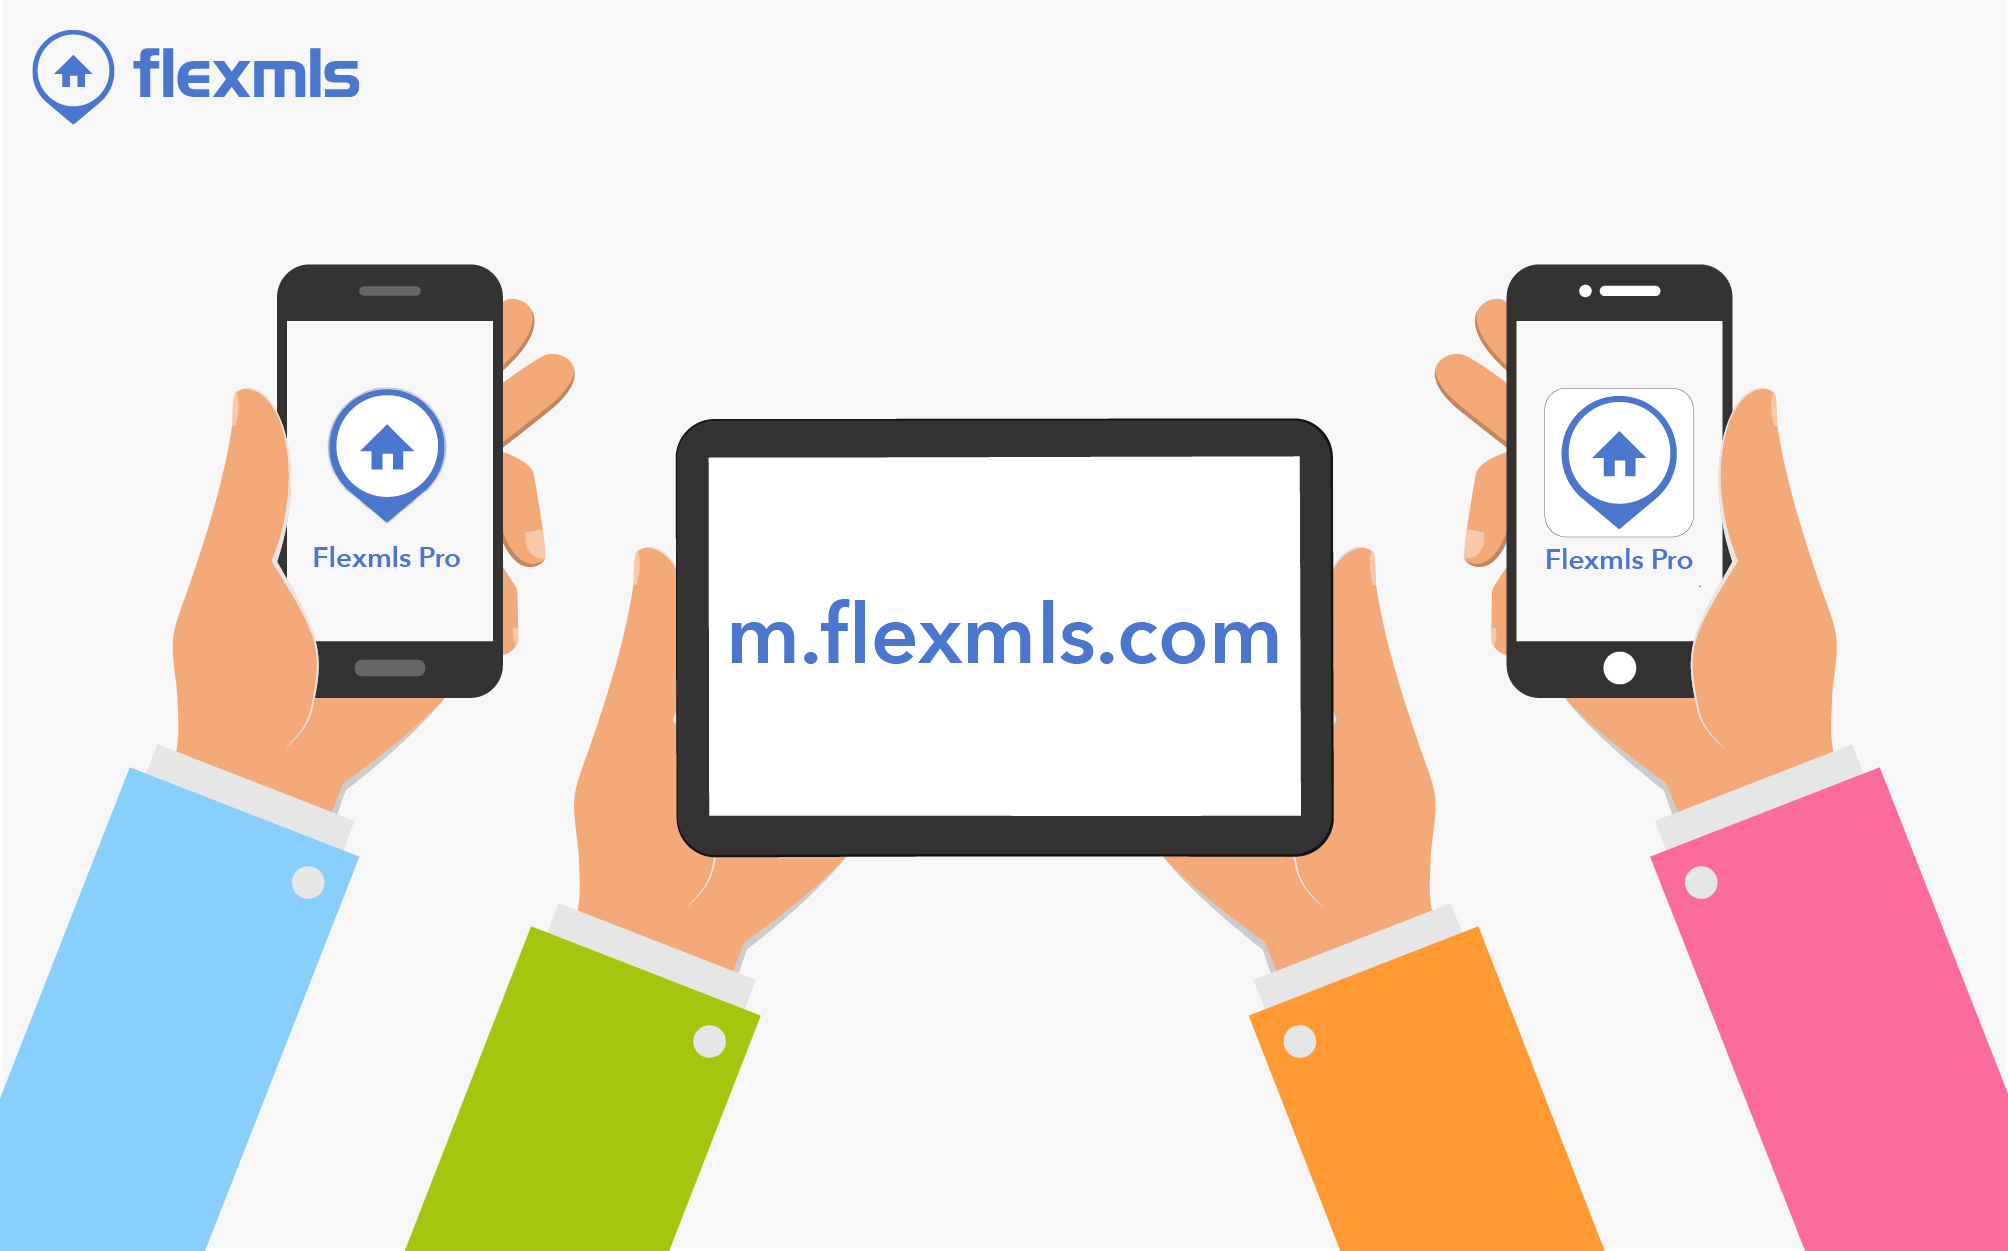 Are you on Flexmls Mobile?